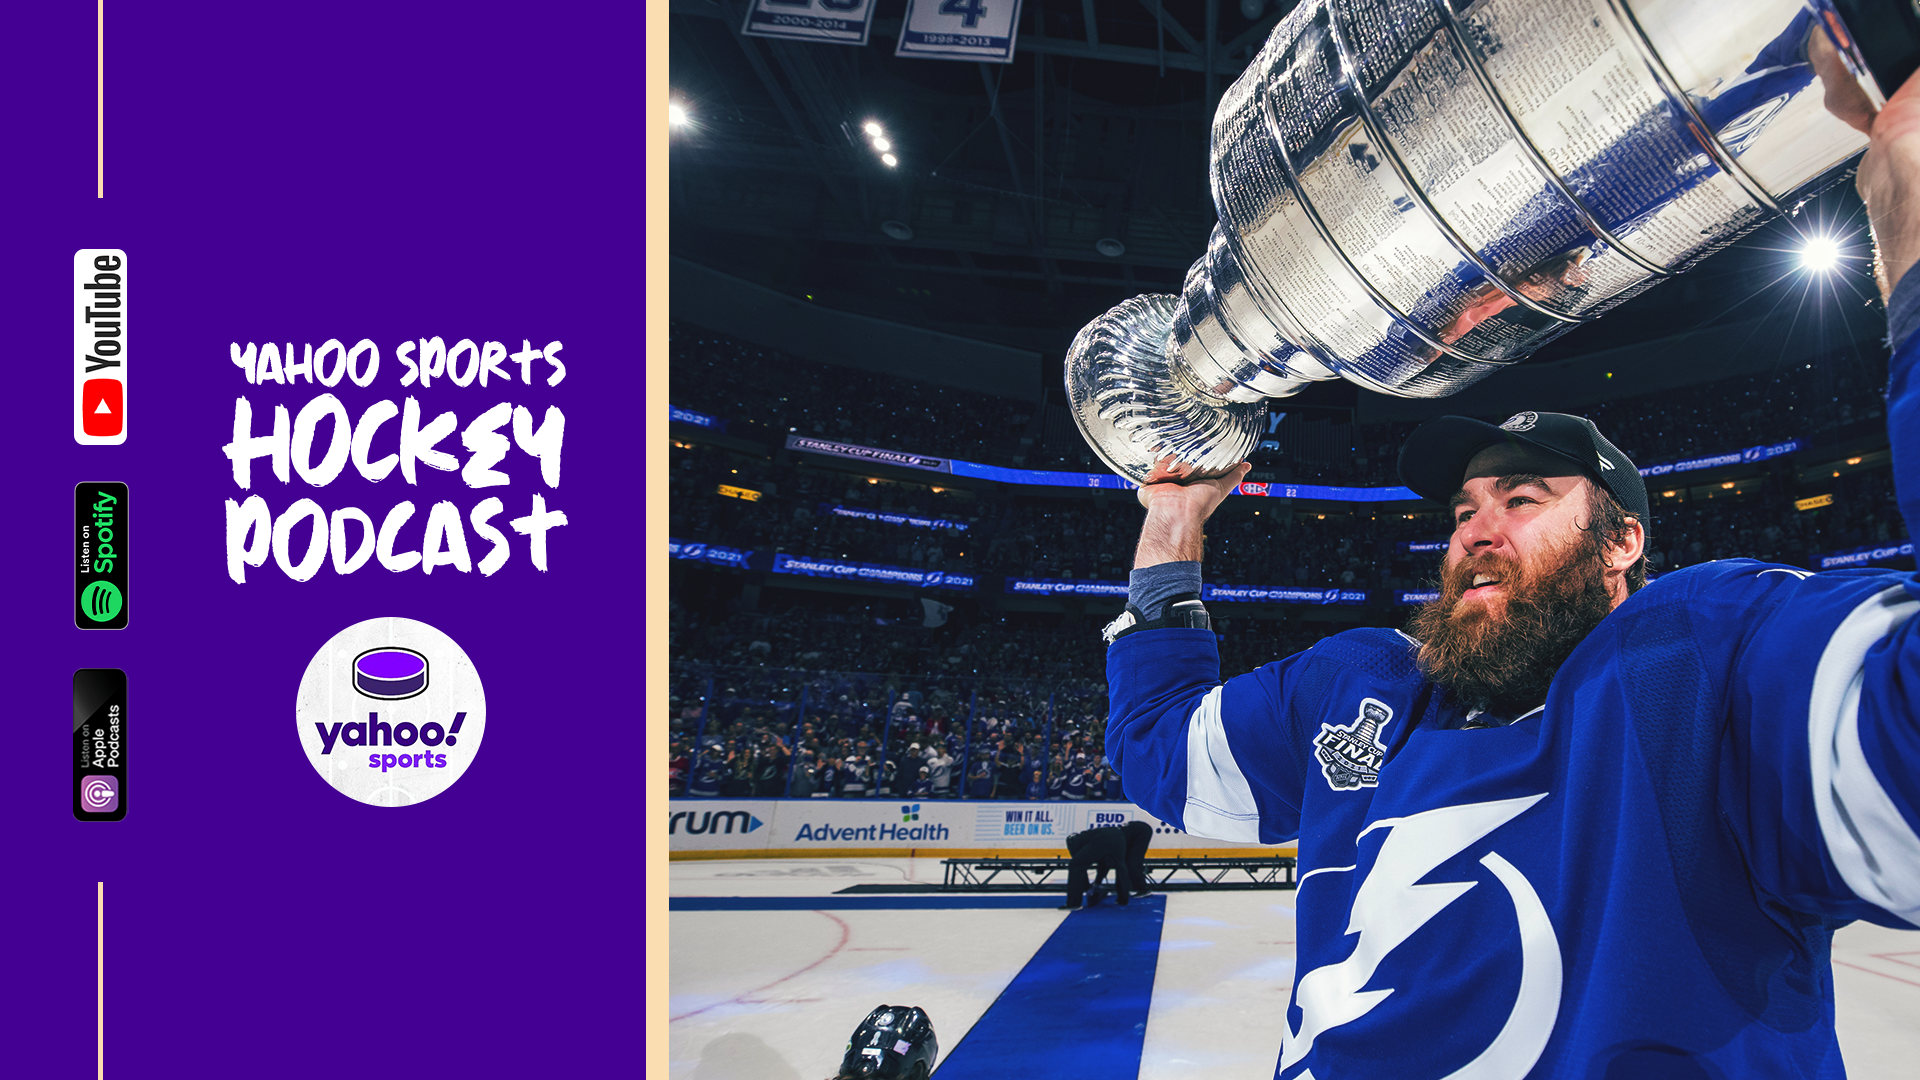 Lightning's Pat Maroon has real story on how Stanley Cup got dented